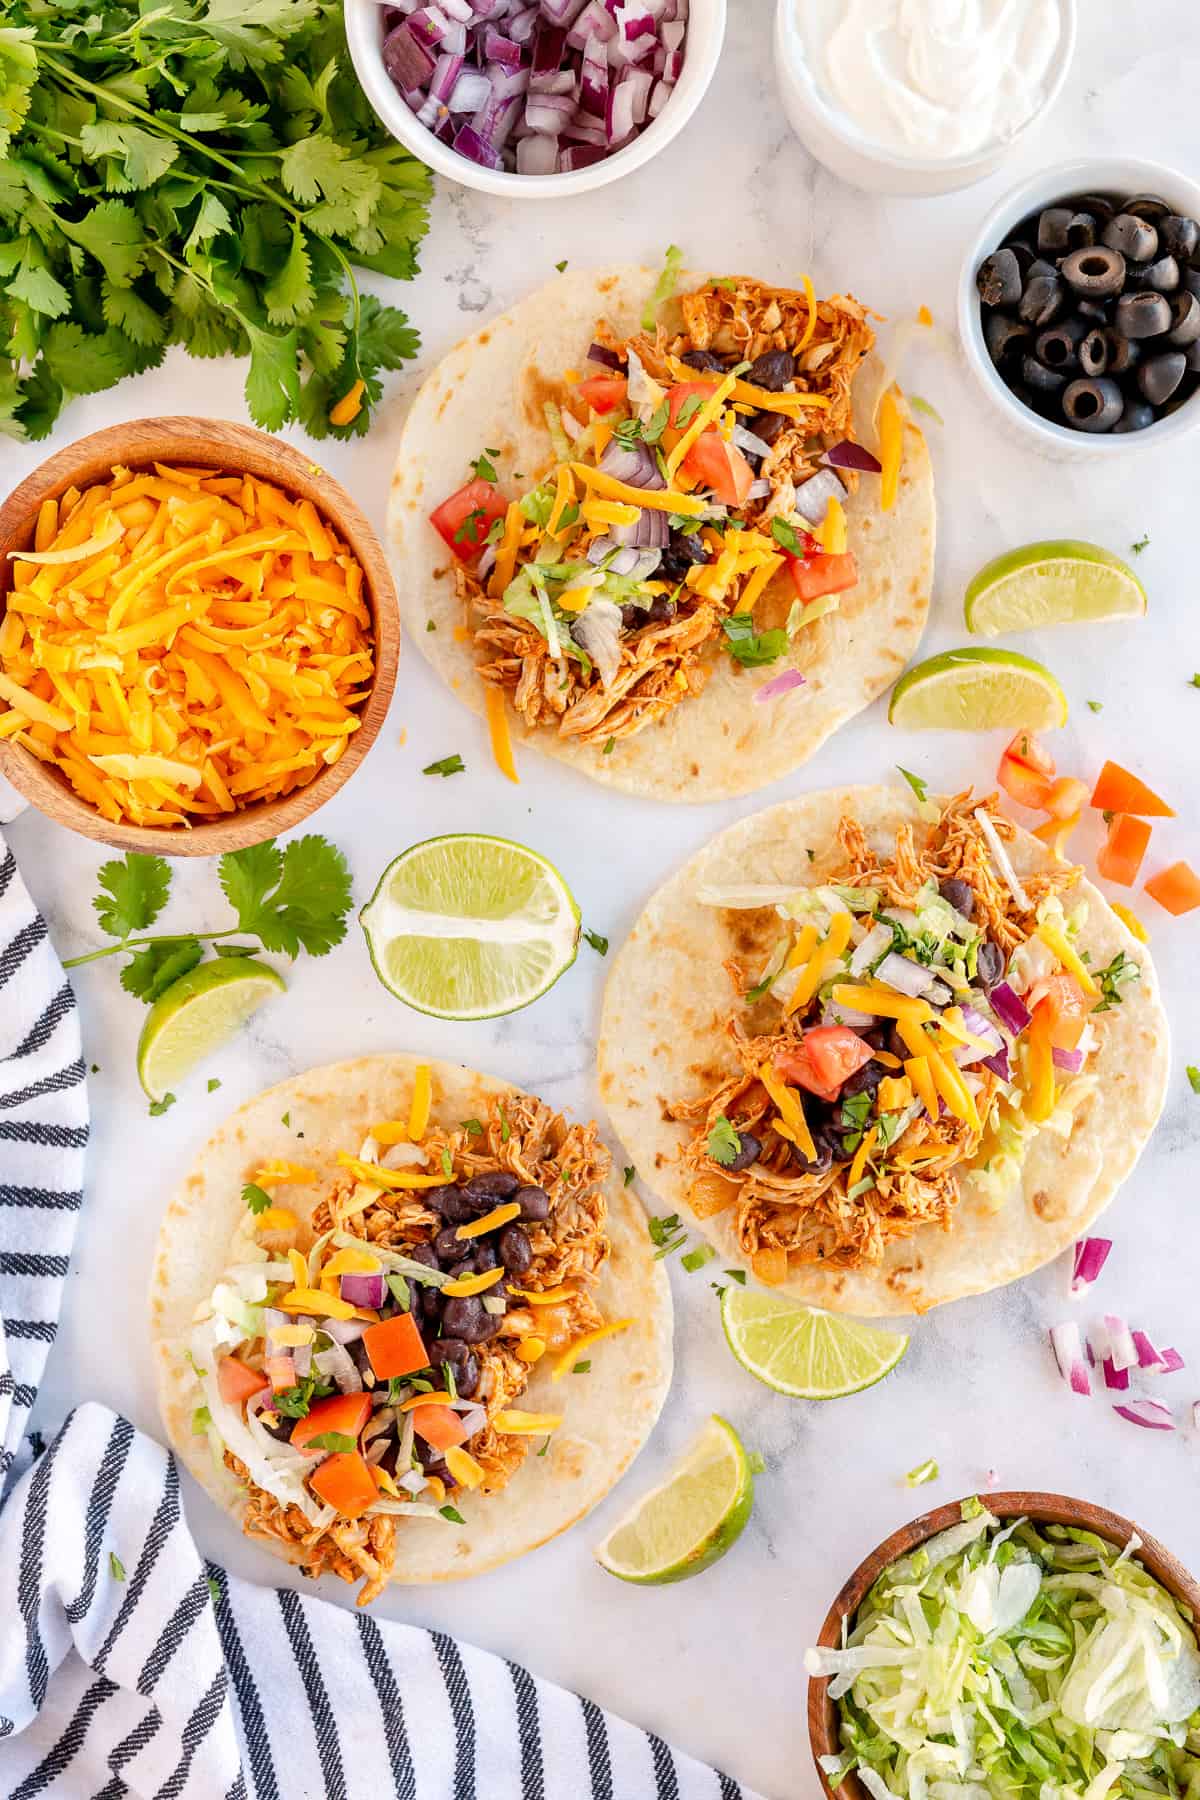 Rotisserie chicken and taco toppings on top of three flour tortillas.